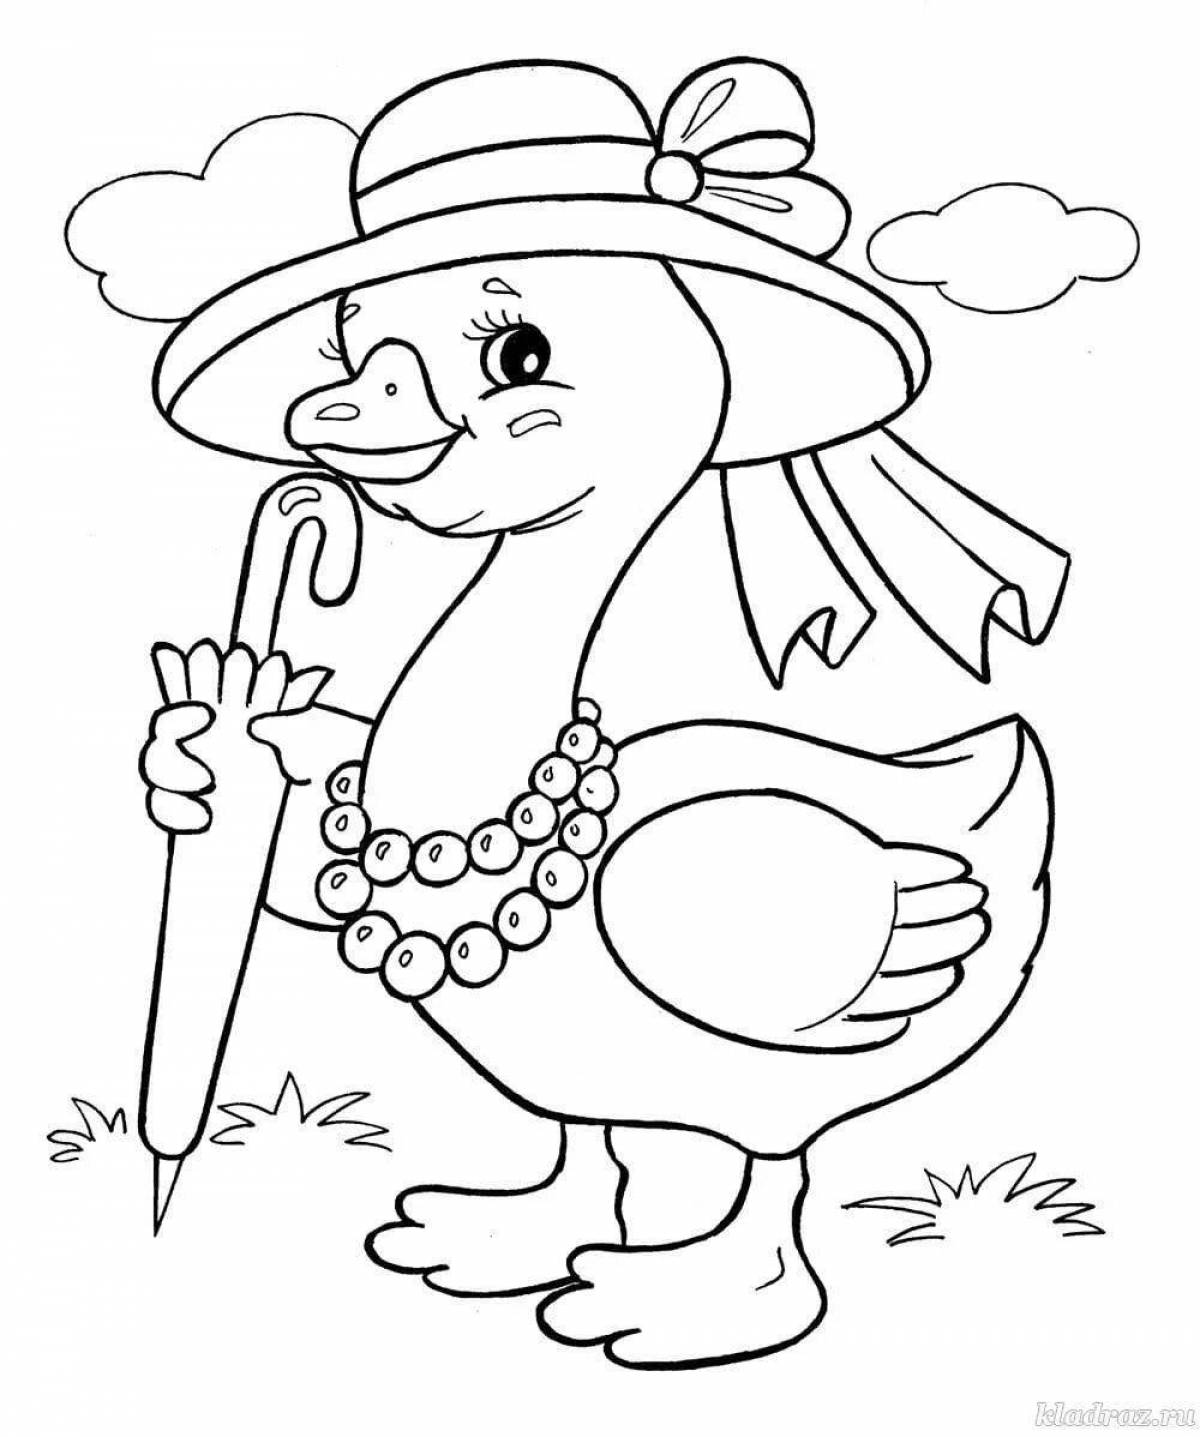 Blissful duck coloring book for girls